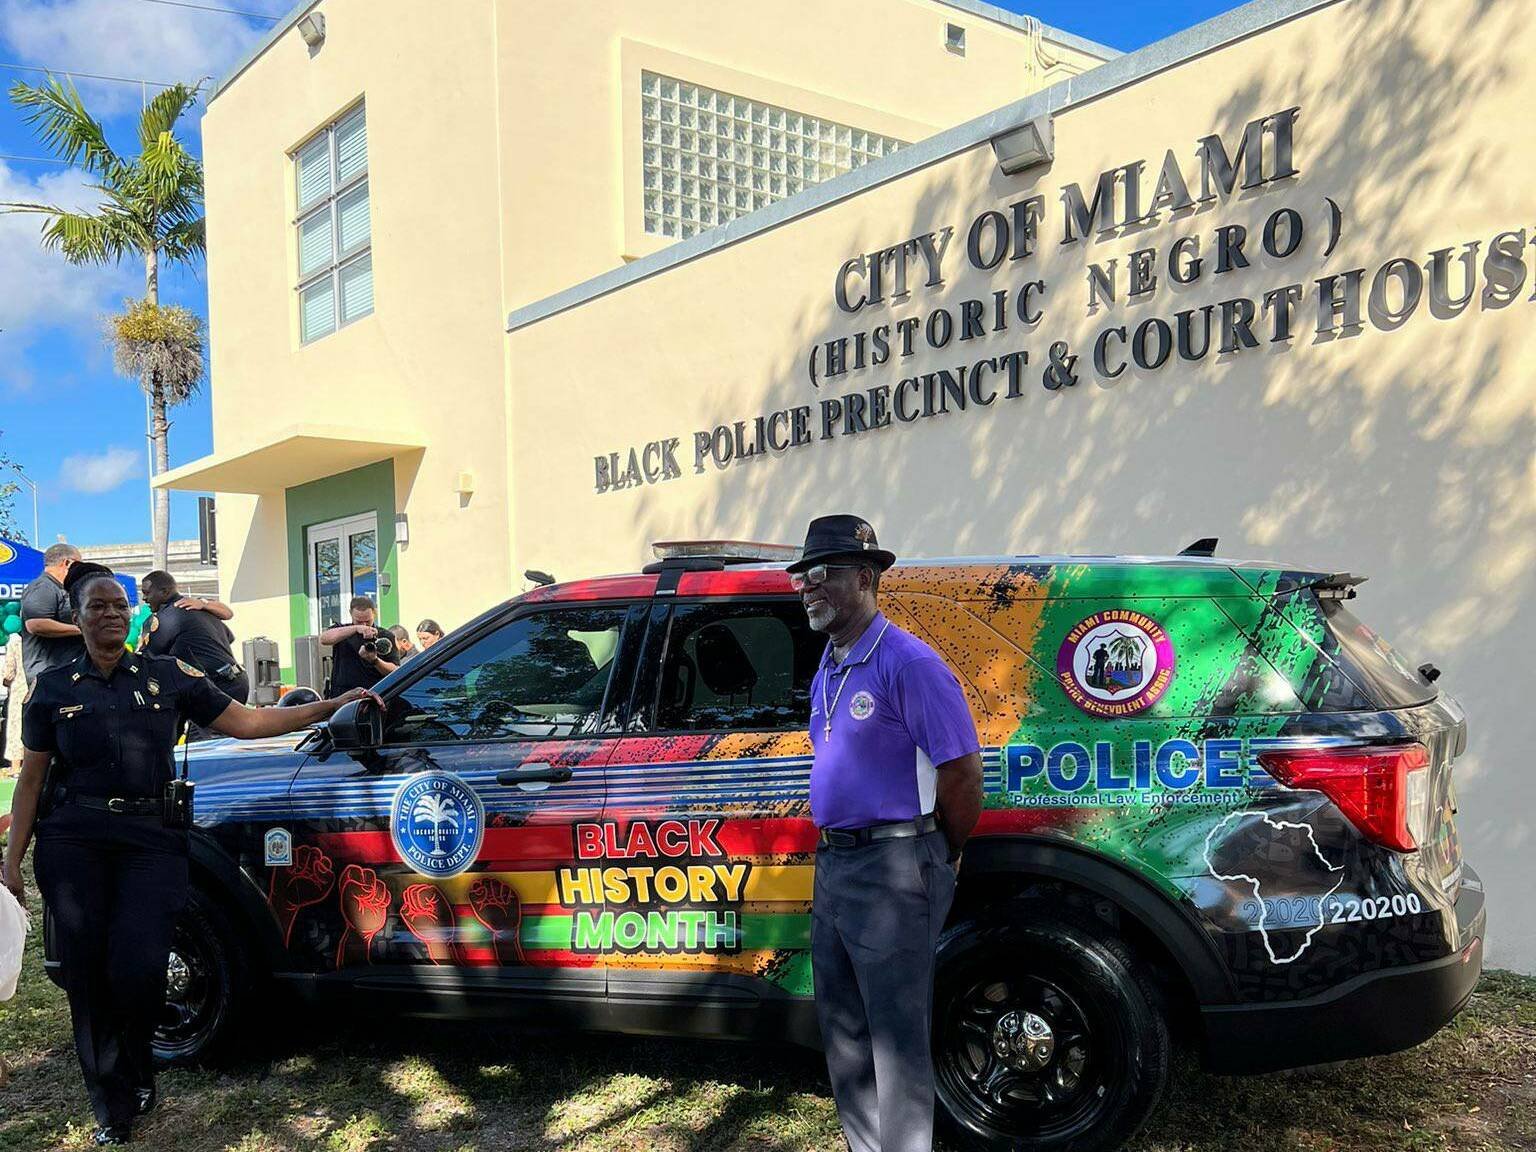 A Black History Month-themed police car in Miami draws criticism